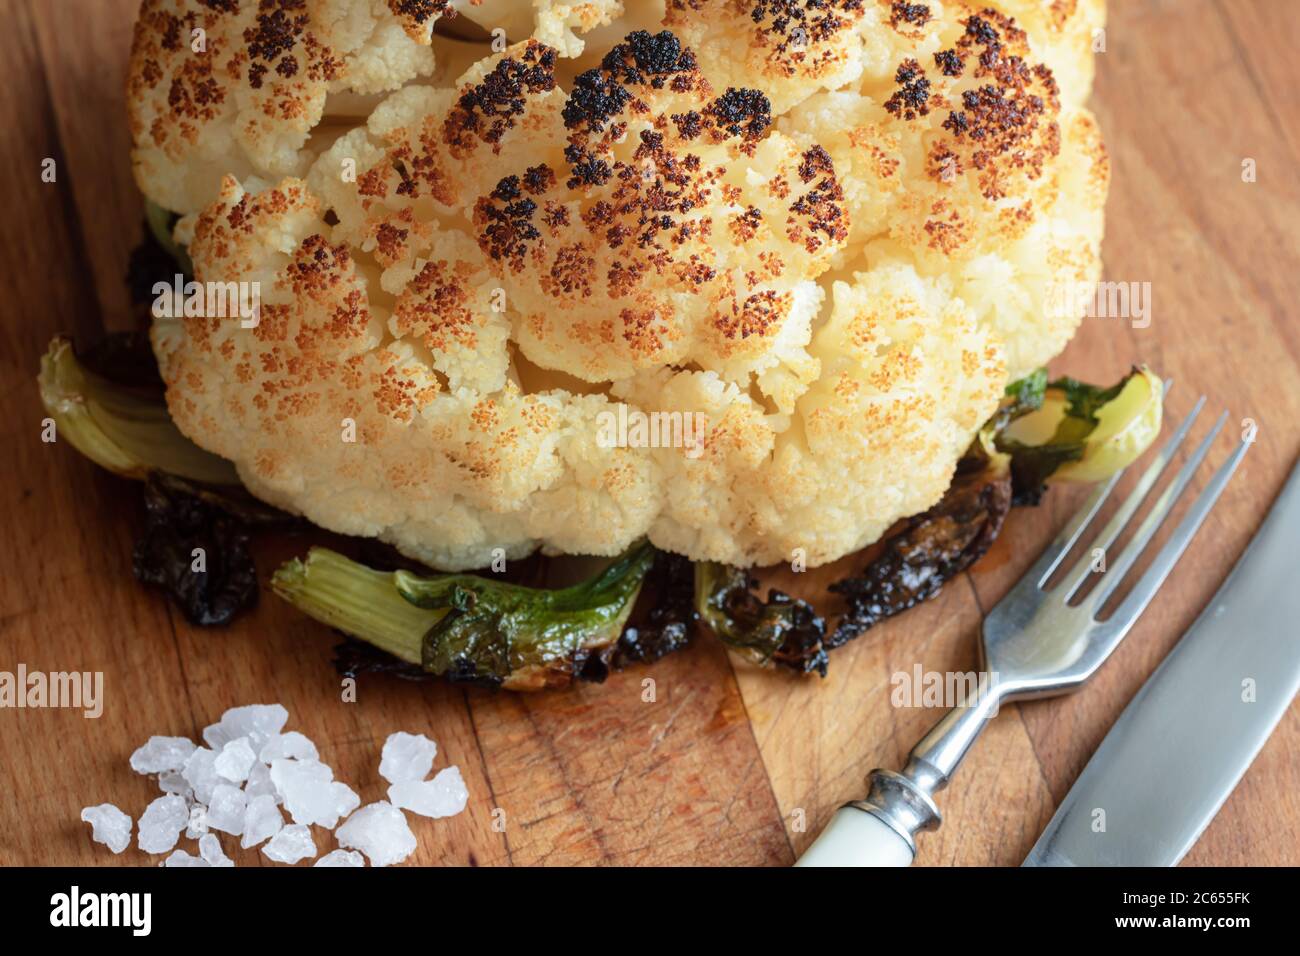 Whole grilled Cauliflower out of the oven with sea salt on a wooden board. Vegan food. Vegeterian food. Cooking at home. Close-up Stock Photo